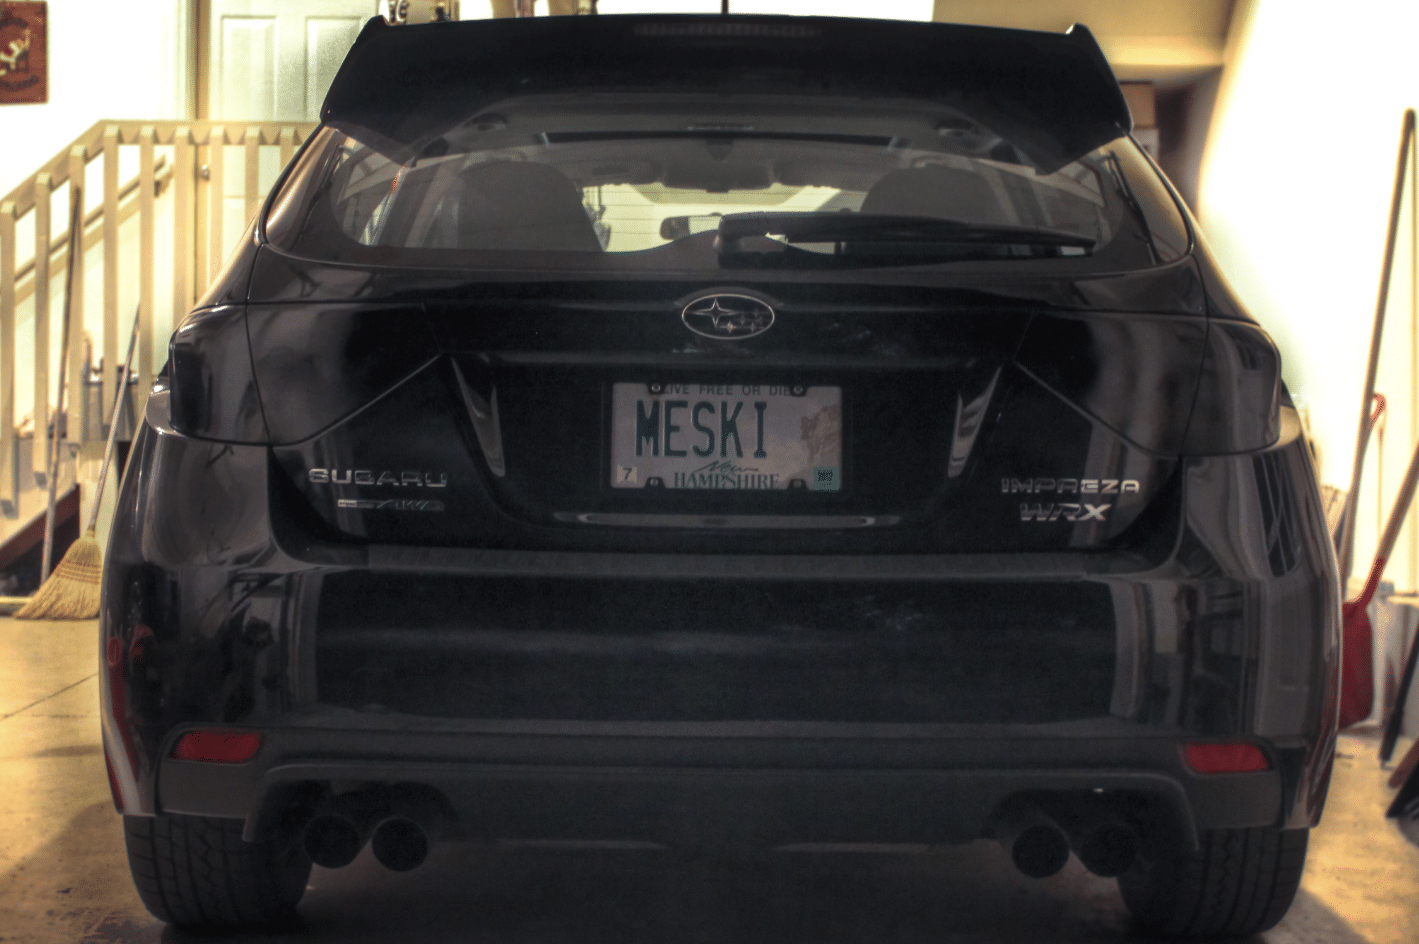 WRX blacked out taillights